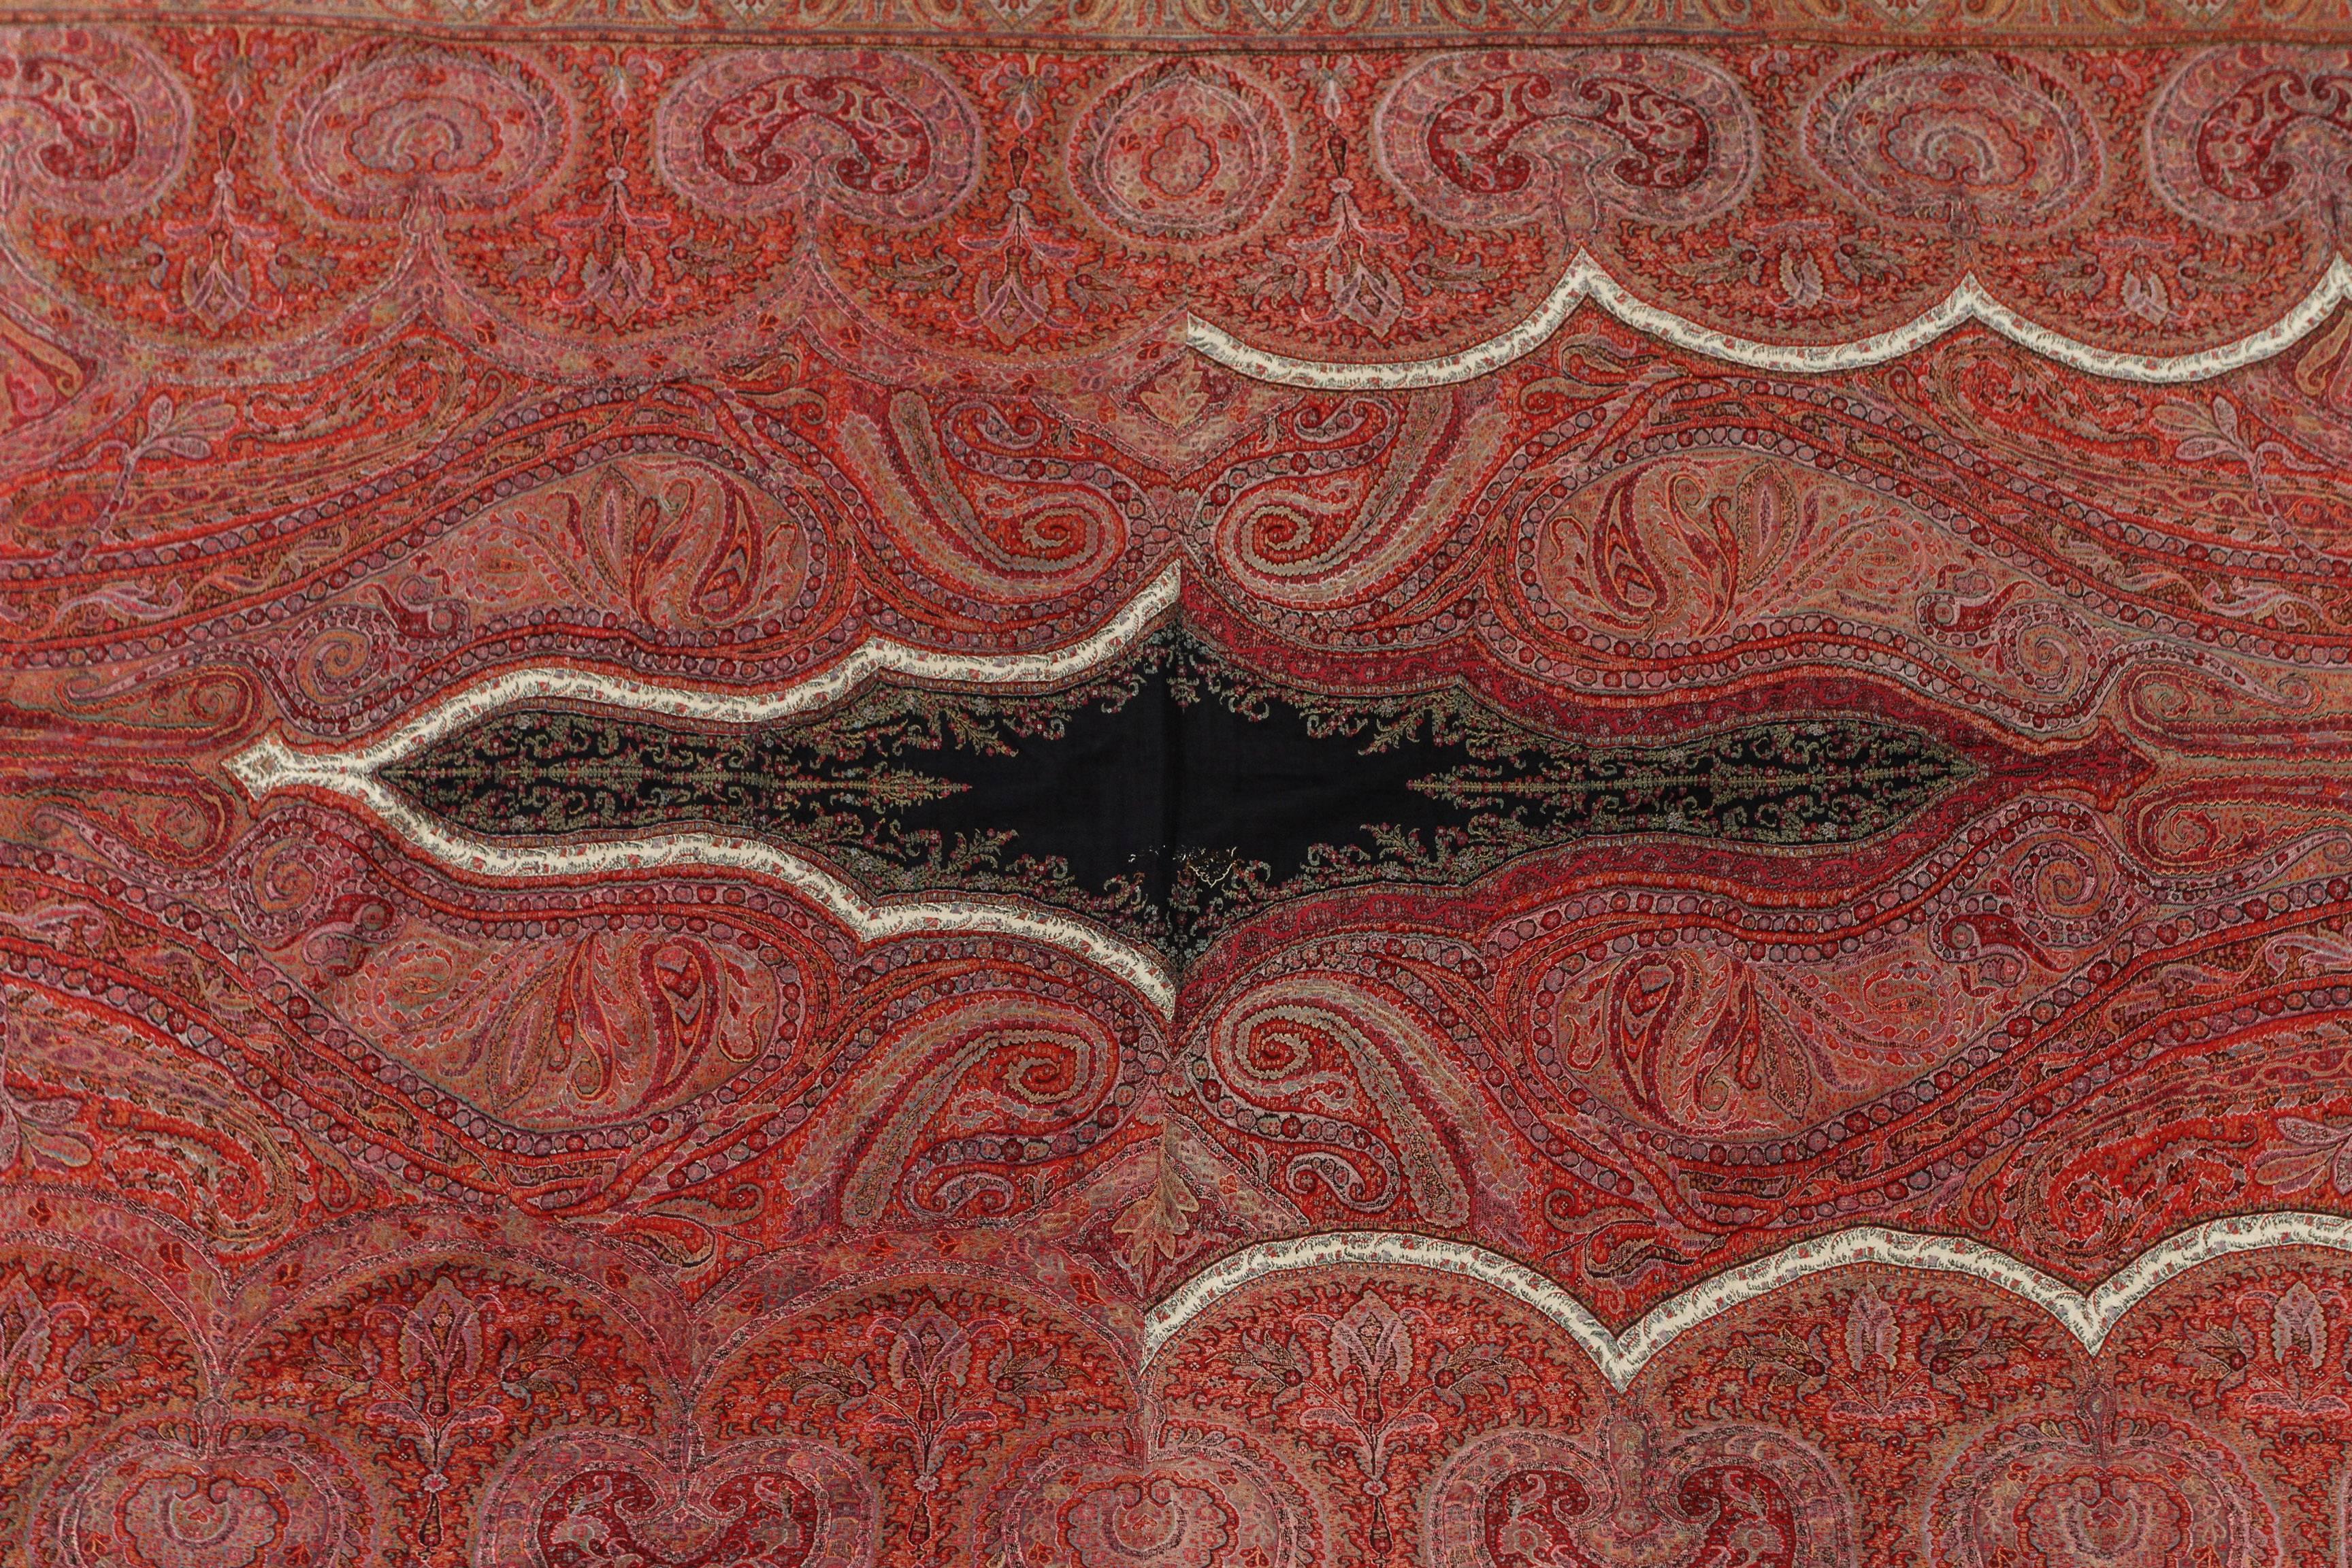 Brown Antique Cashmere Paisley Throw Textile Shawl, 1850-1890 For Sale